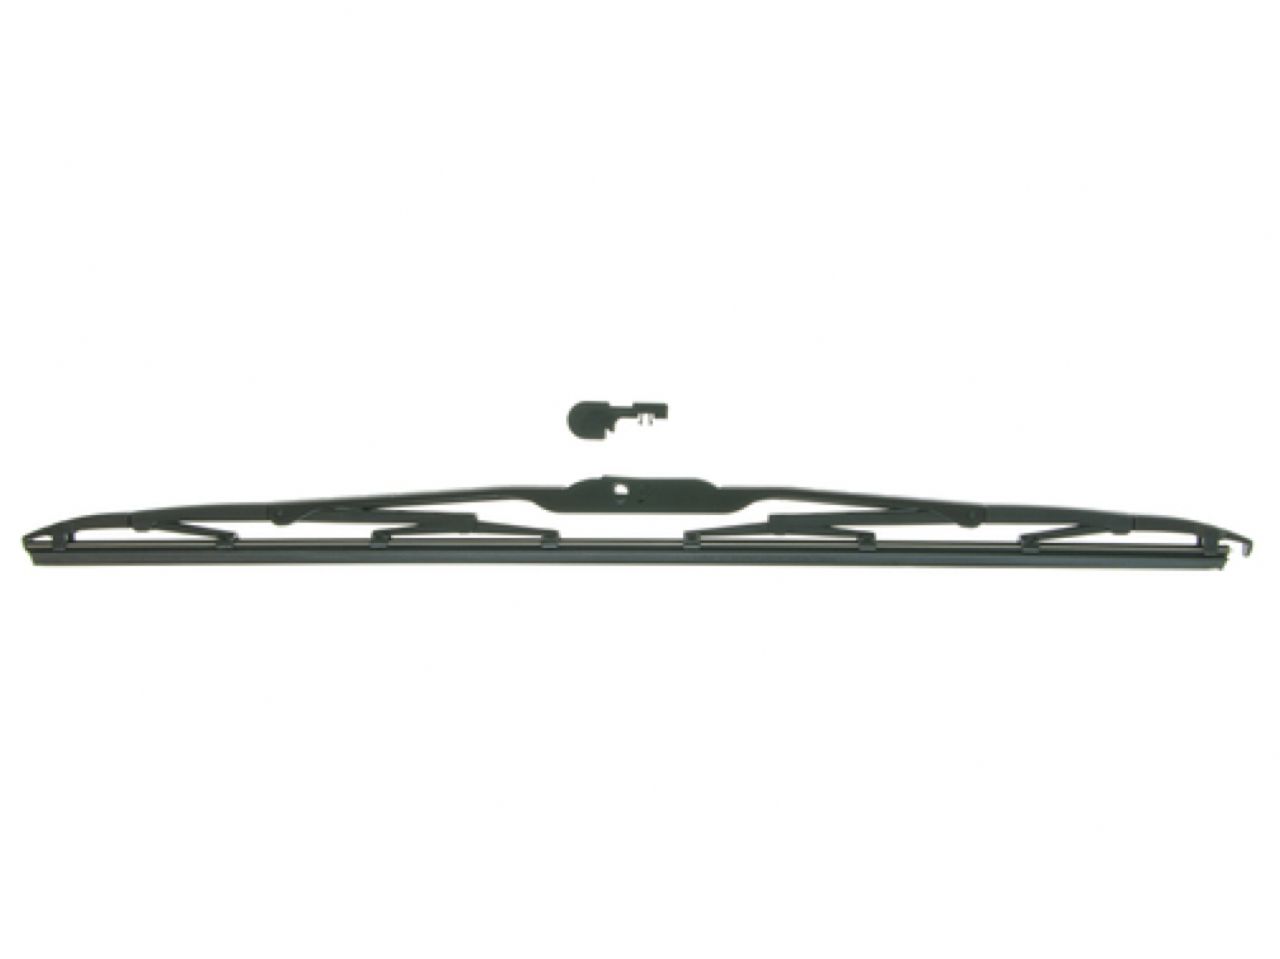 Anco Windshield Wipers 31-21 Item Image